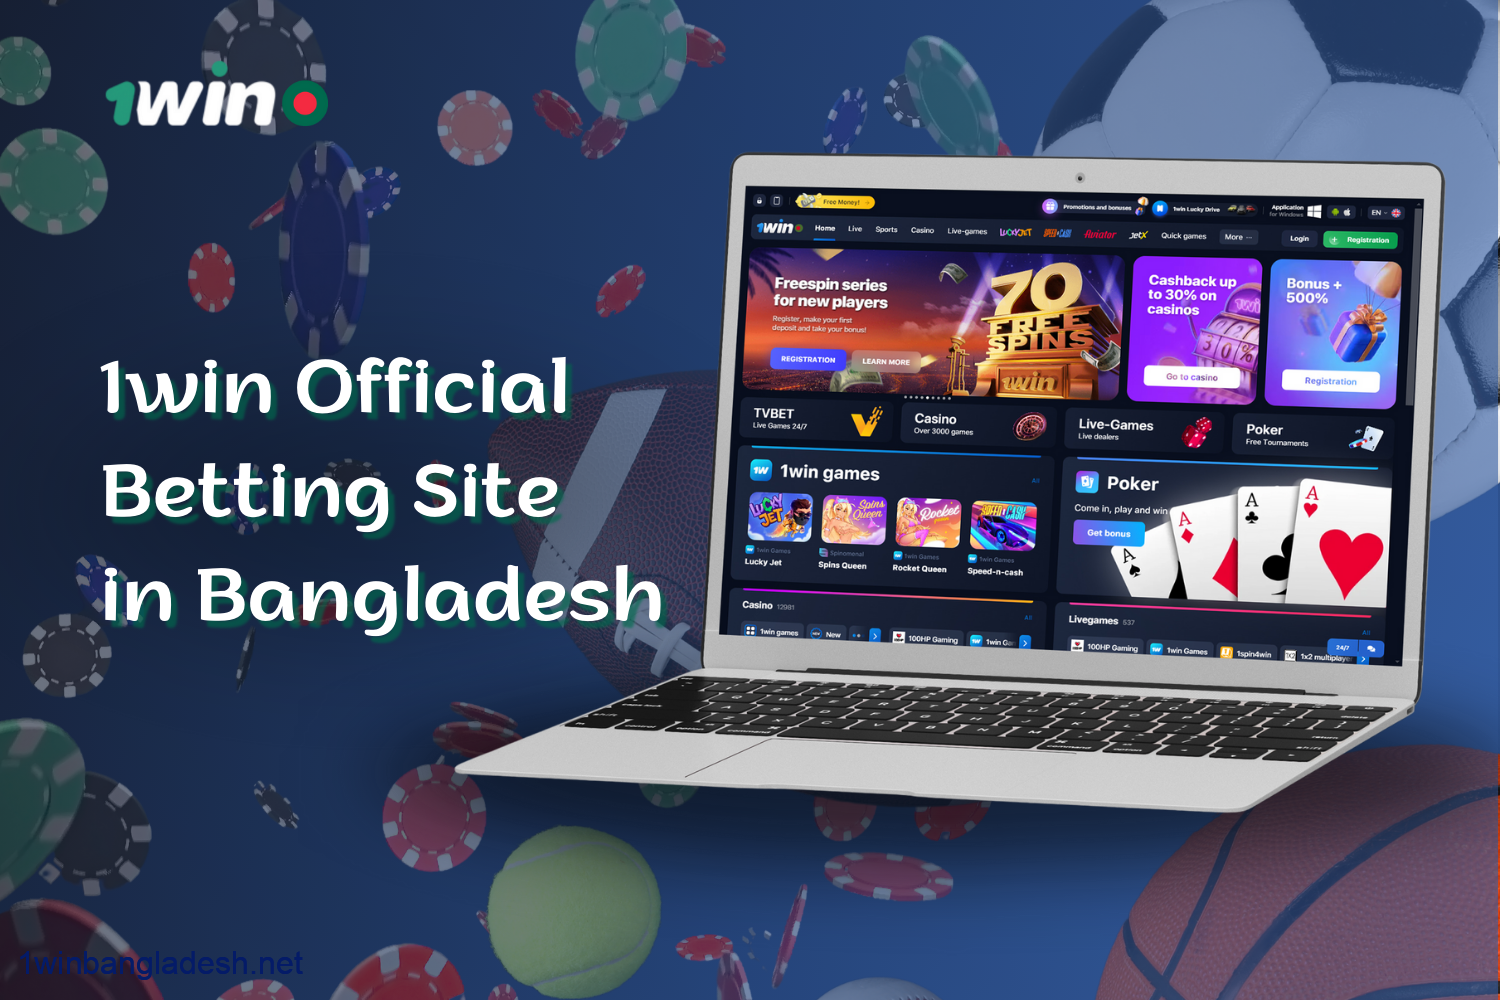 1win is the official website for betting users from Bangladesh